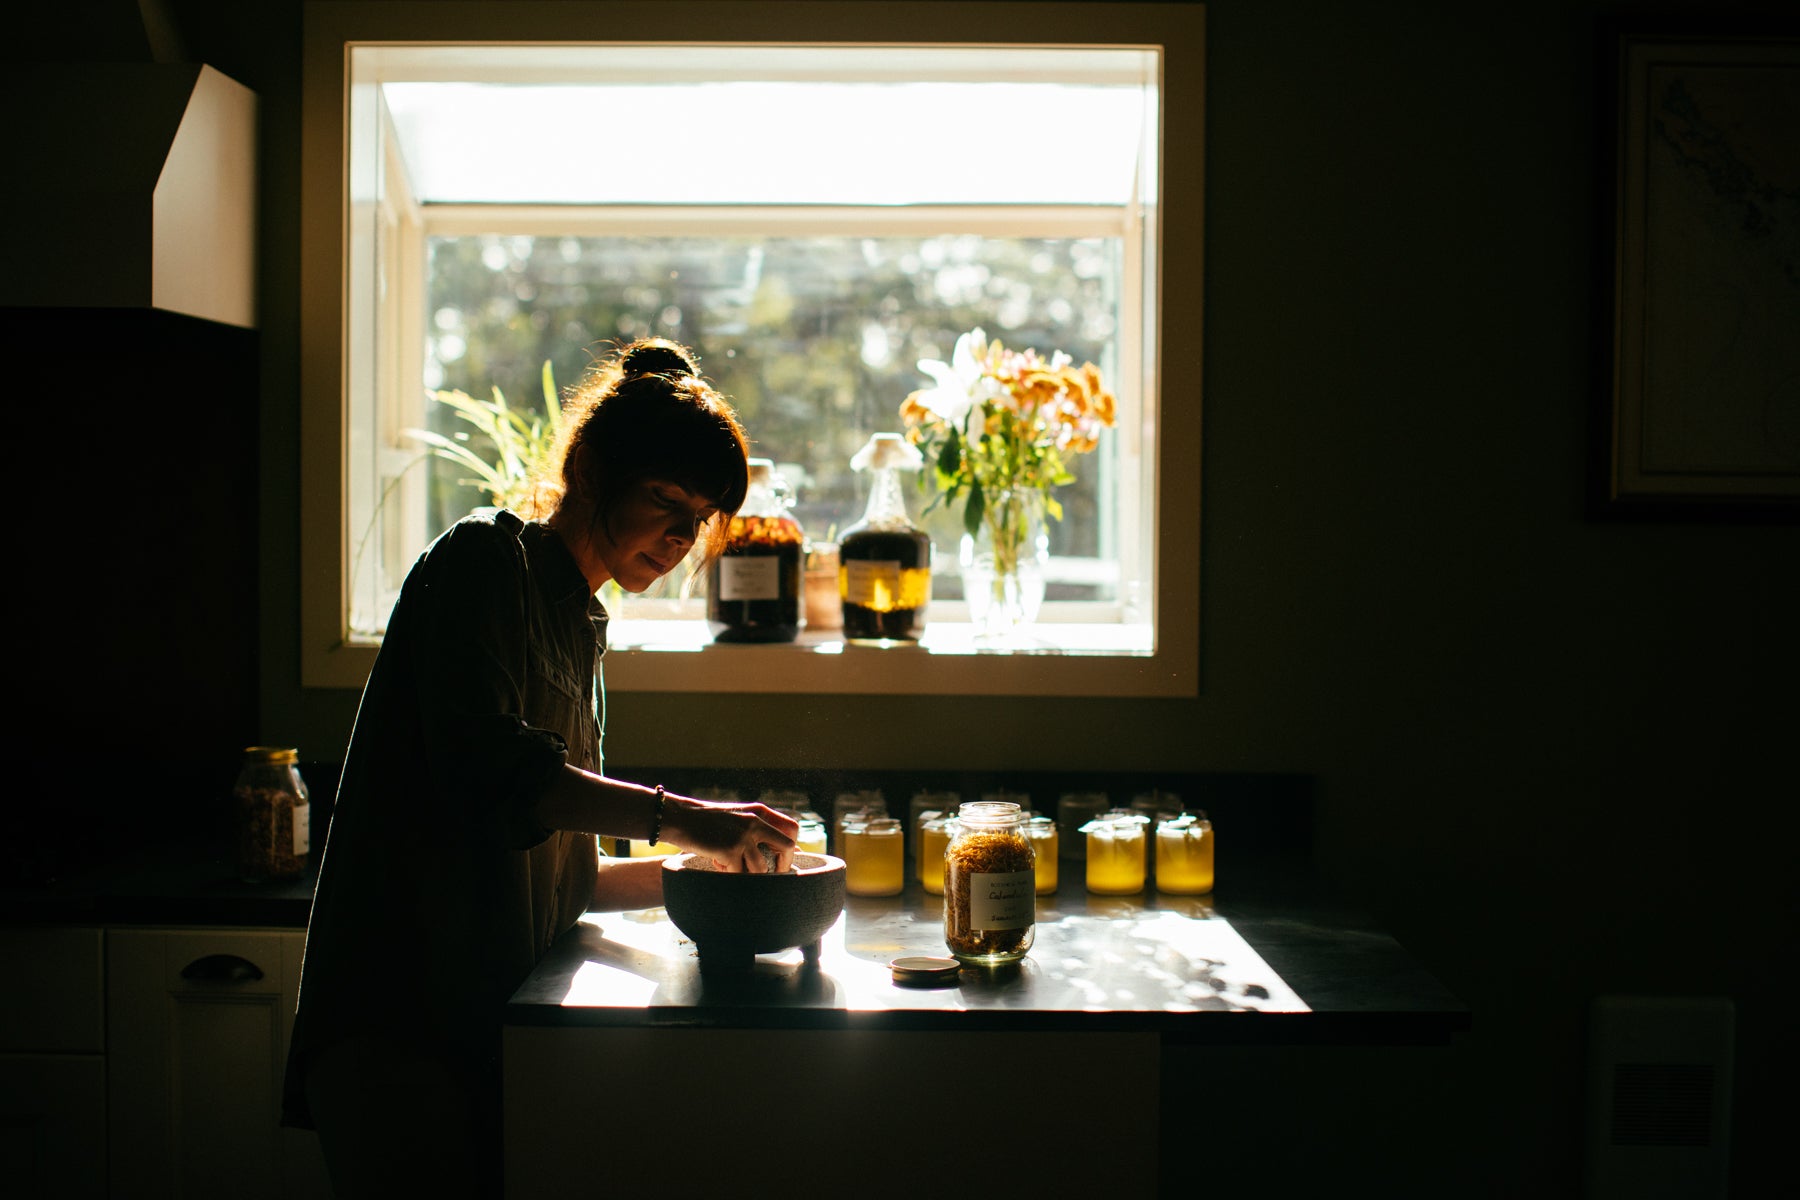 At her workspace, Angela L'Heureux uses a stone mortar and pestle to grind her ingredients by hand.  